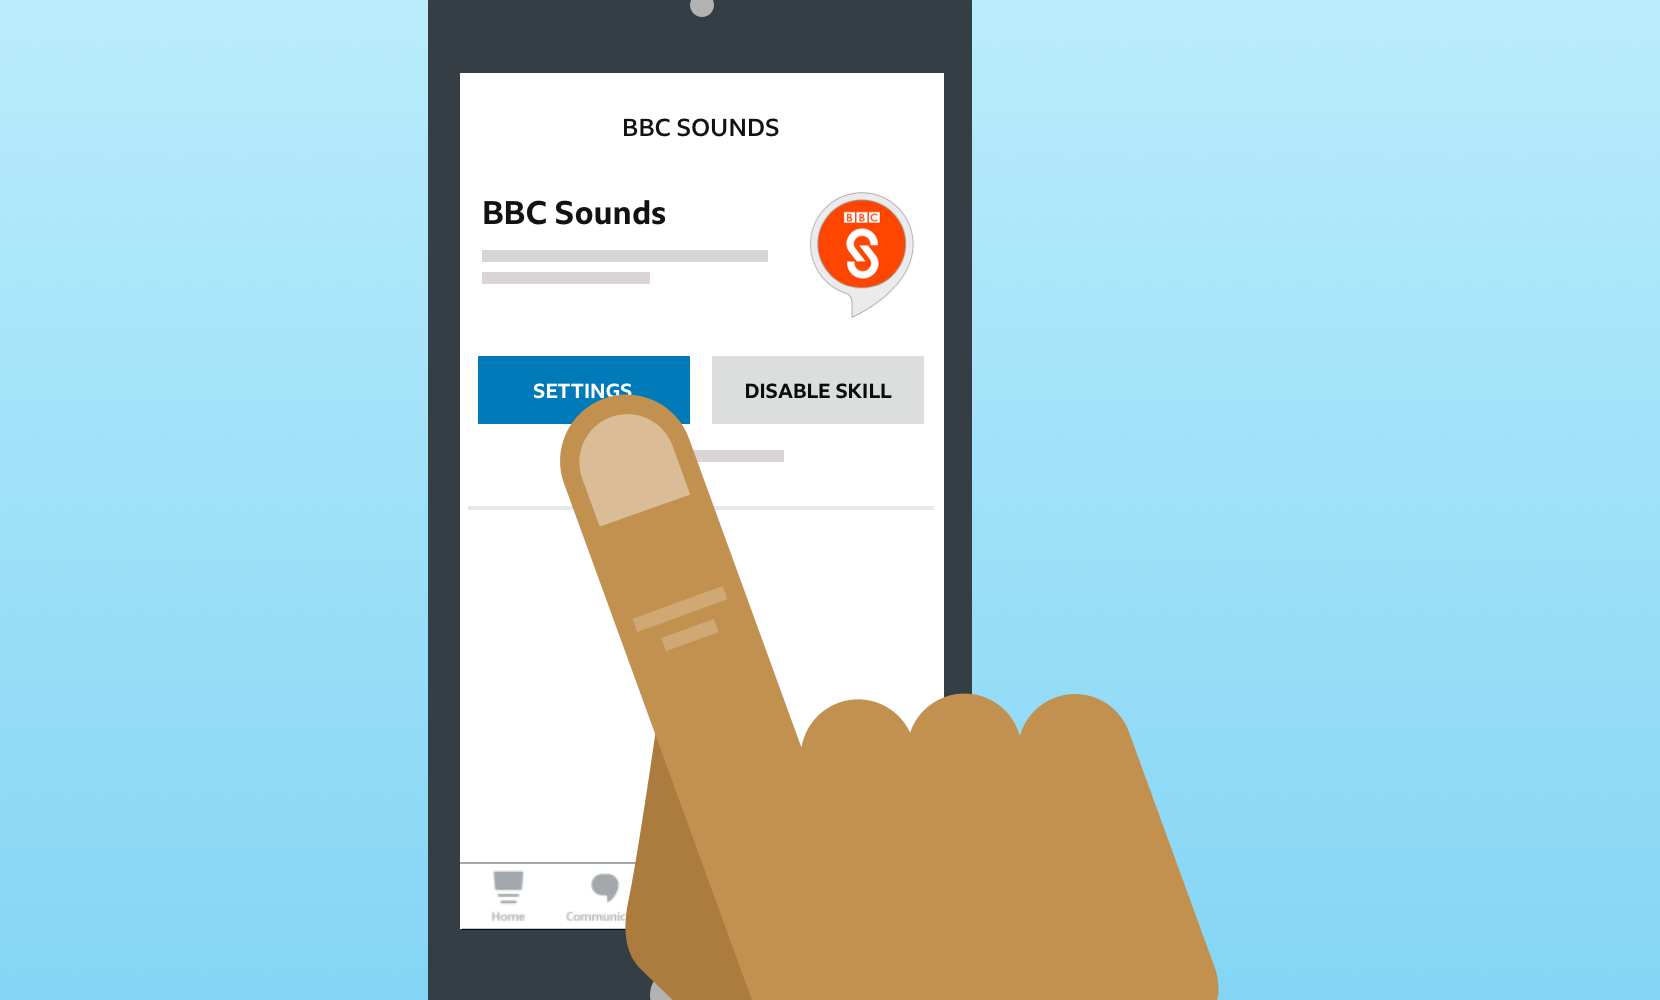 Illustration of the Alexa app on a phone, opened in the BBC Sounds skill. The user is about to tap the Settings button on the left hand side.